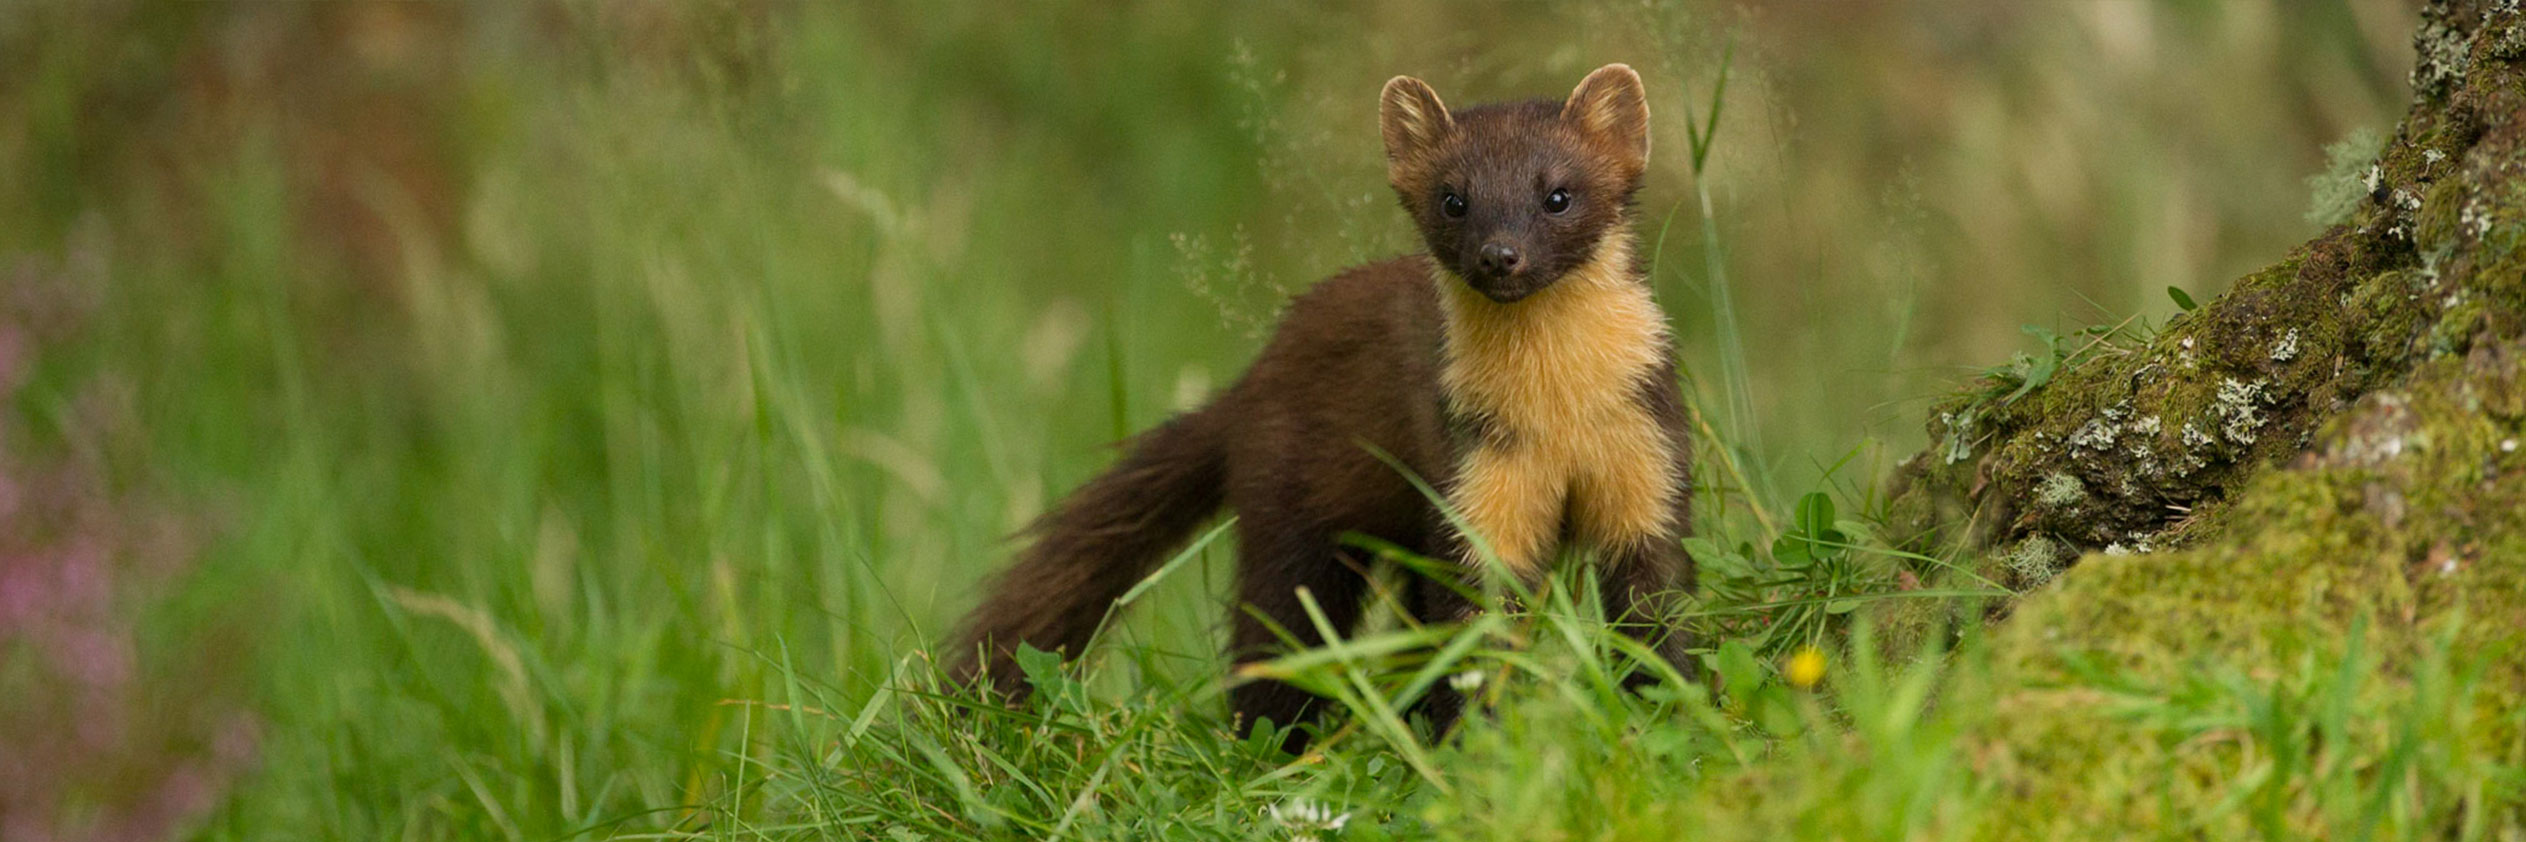 CATCHING UP WITH THE ELUSIVE PINE MARTEN